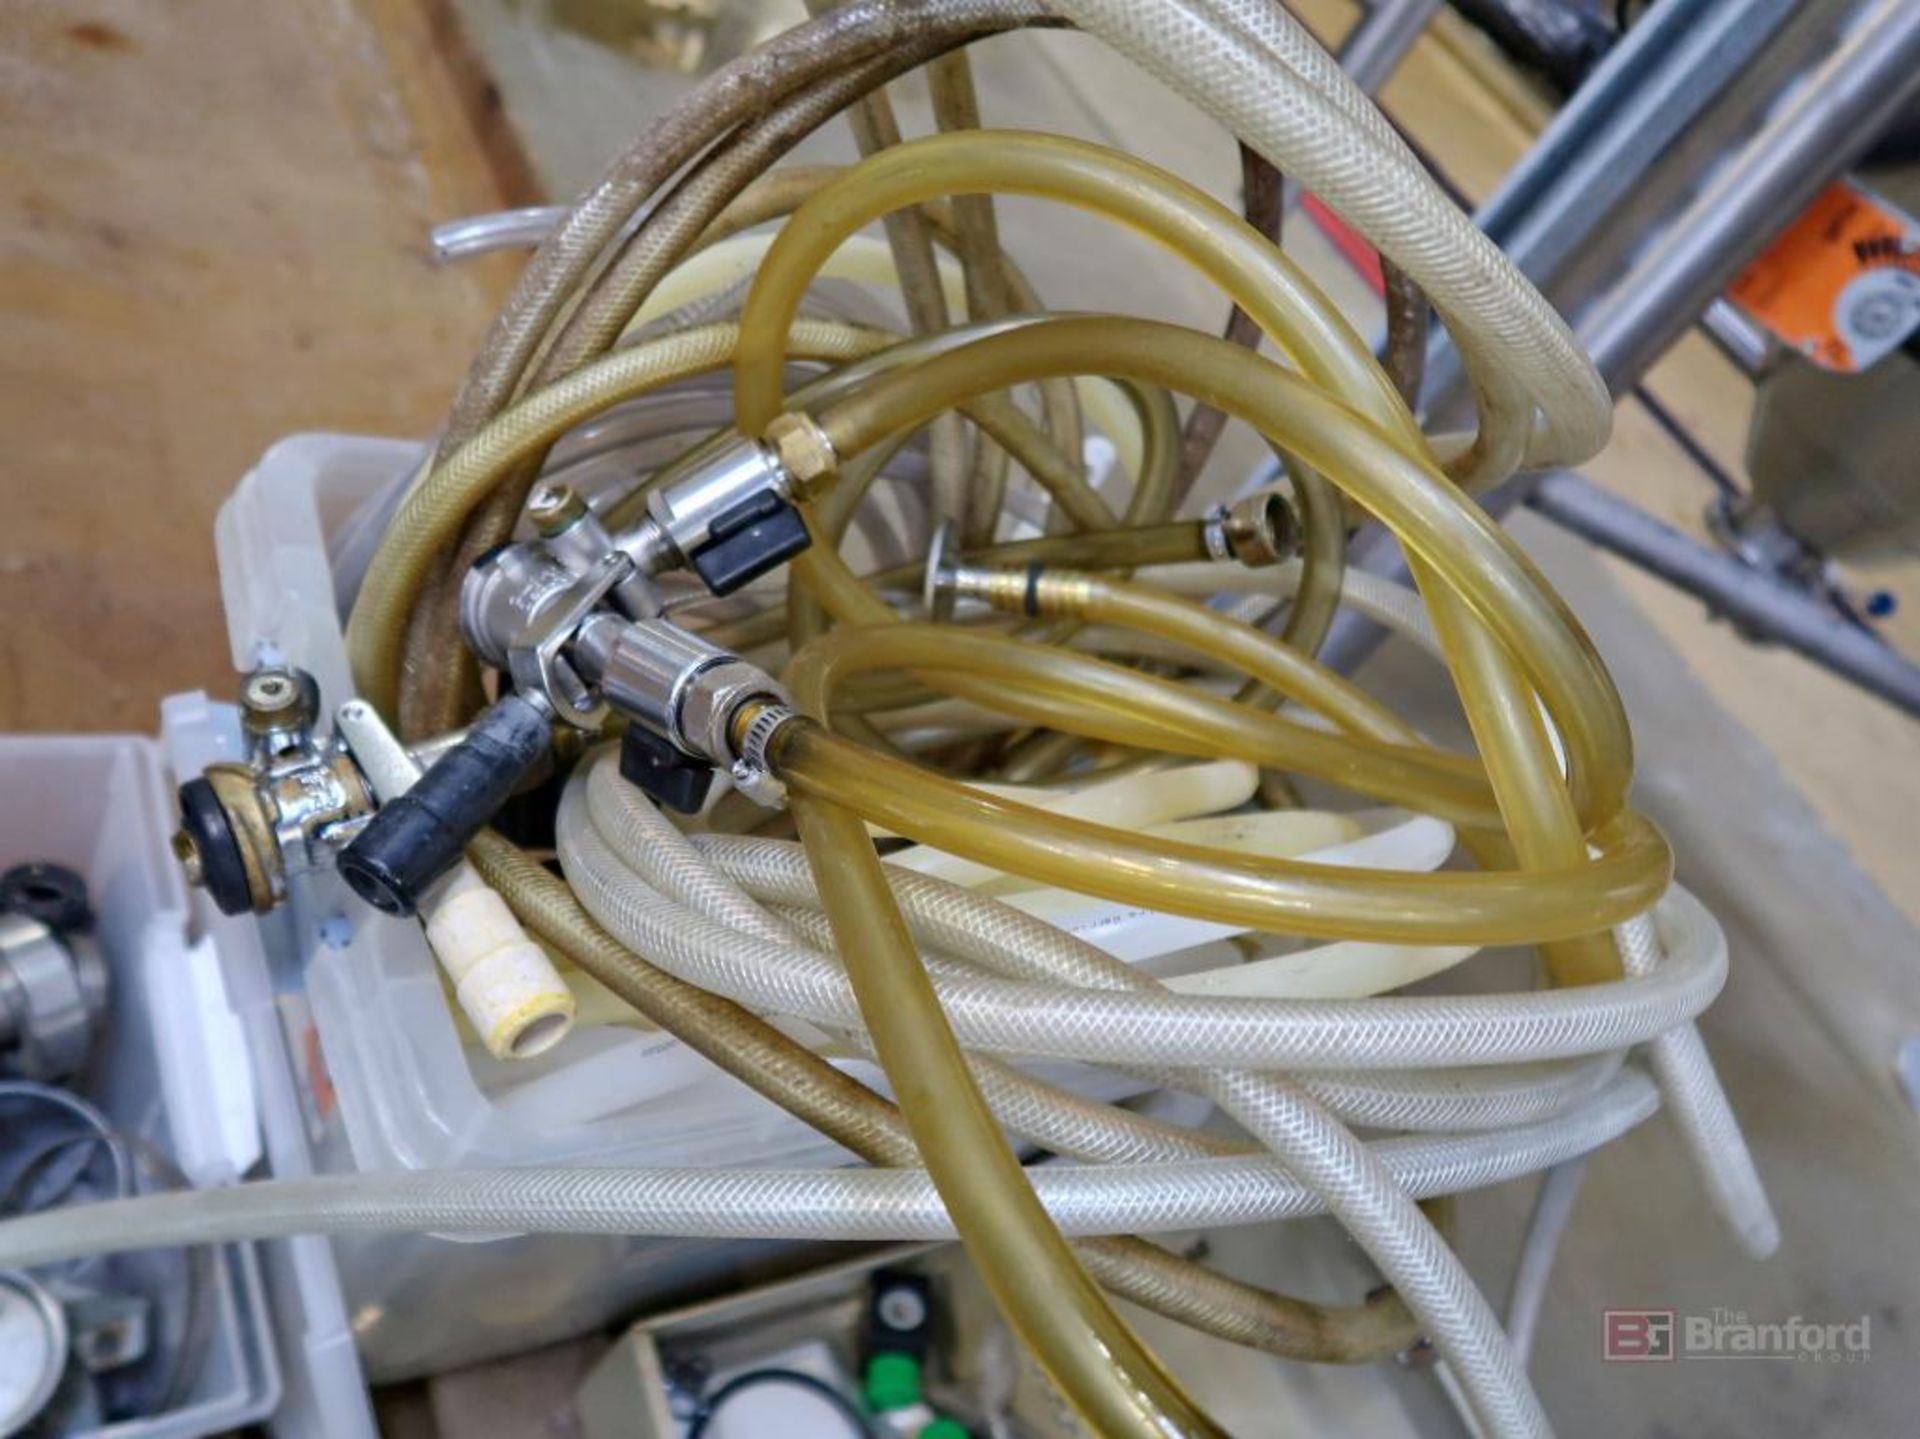 Assorted S/S Valves, Clamps, Elbows, Gages, Hoses, Meters, And Wires - Image 10 of 10